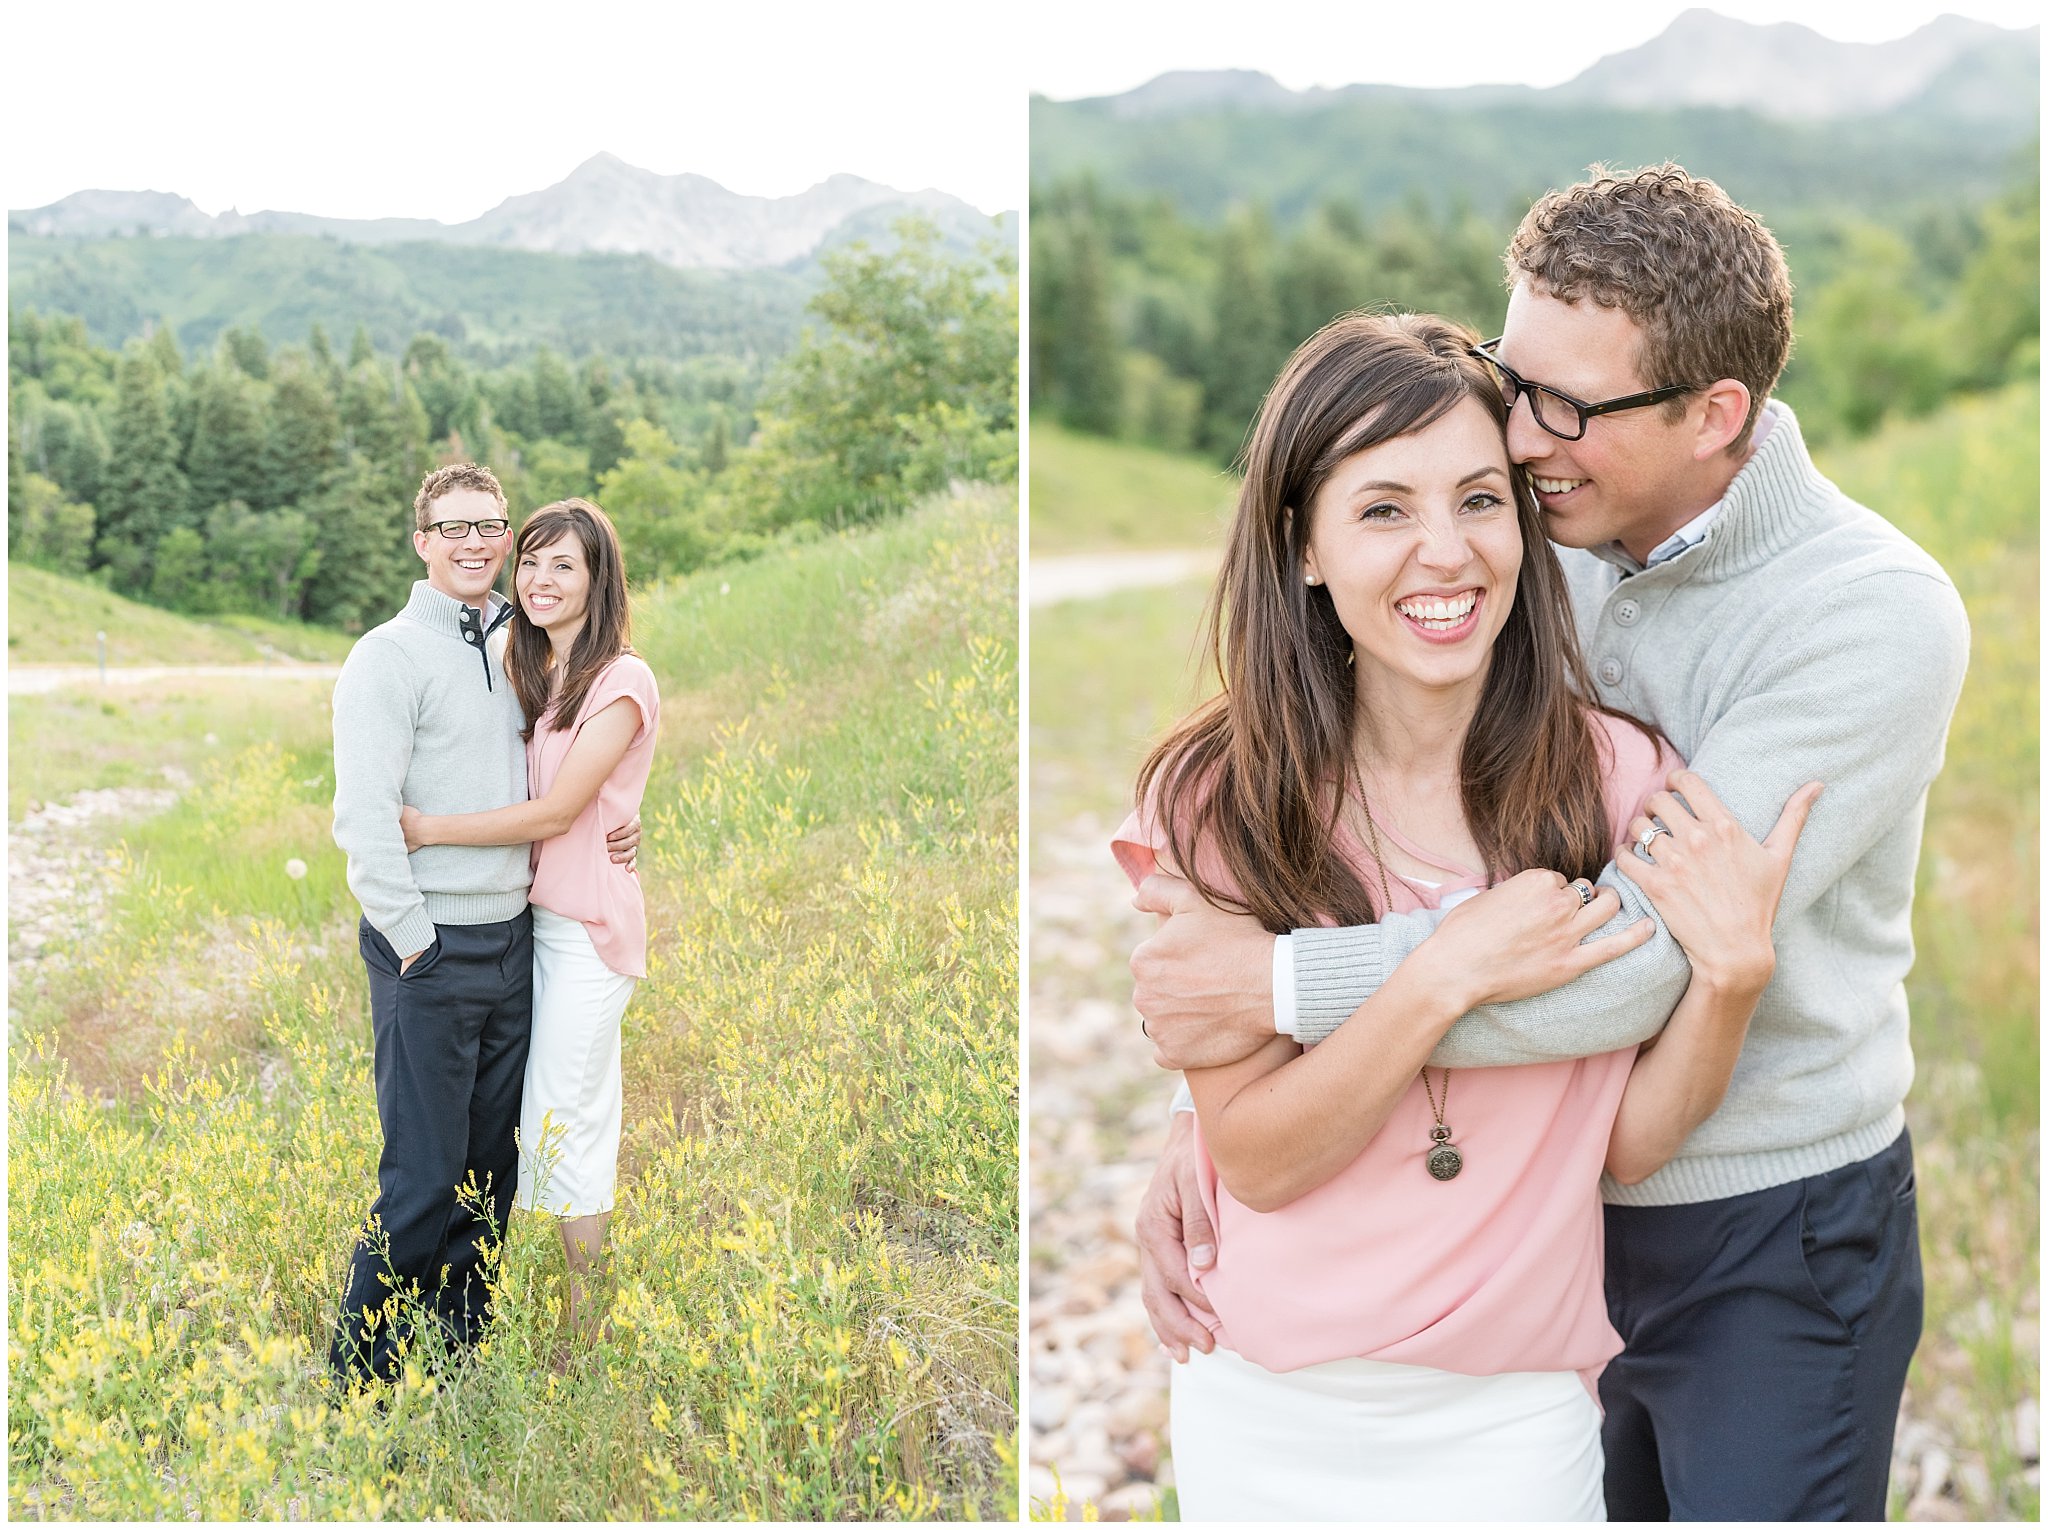 Joyful couple candid pictures with mountains behind them | Utah couples photography at Snowbasin